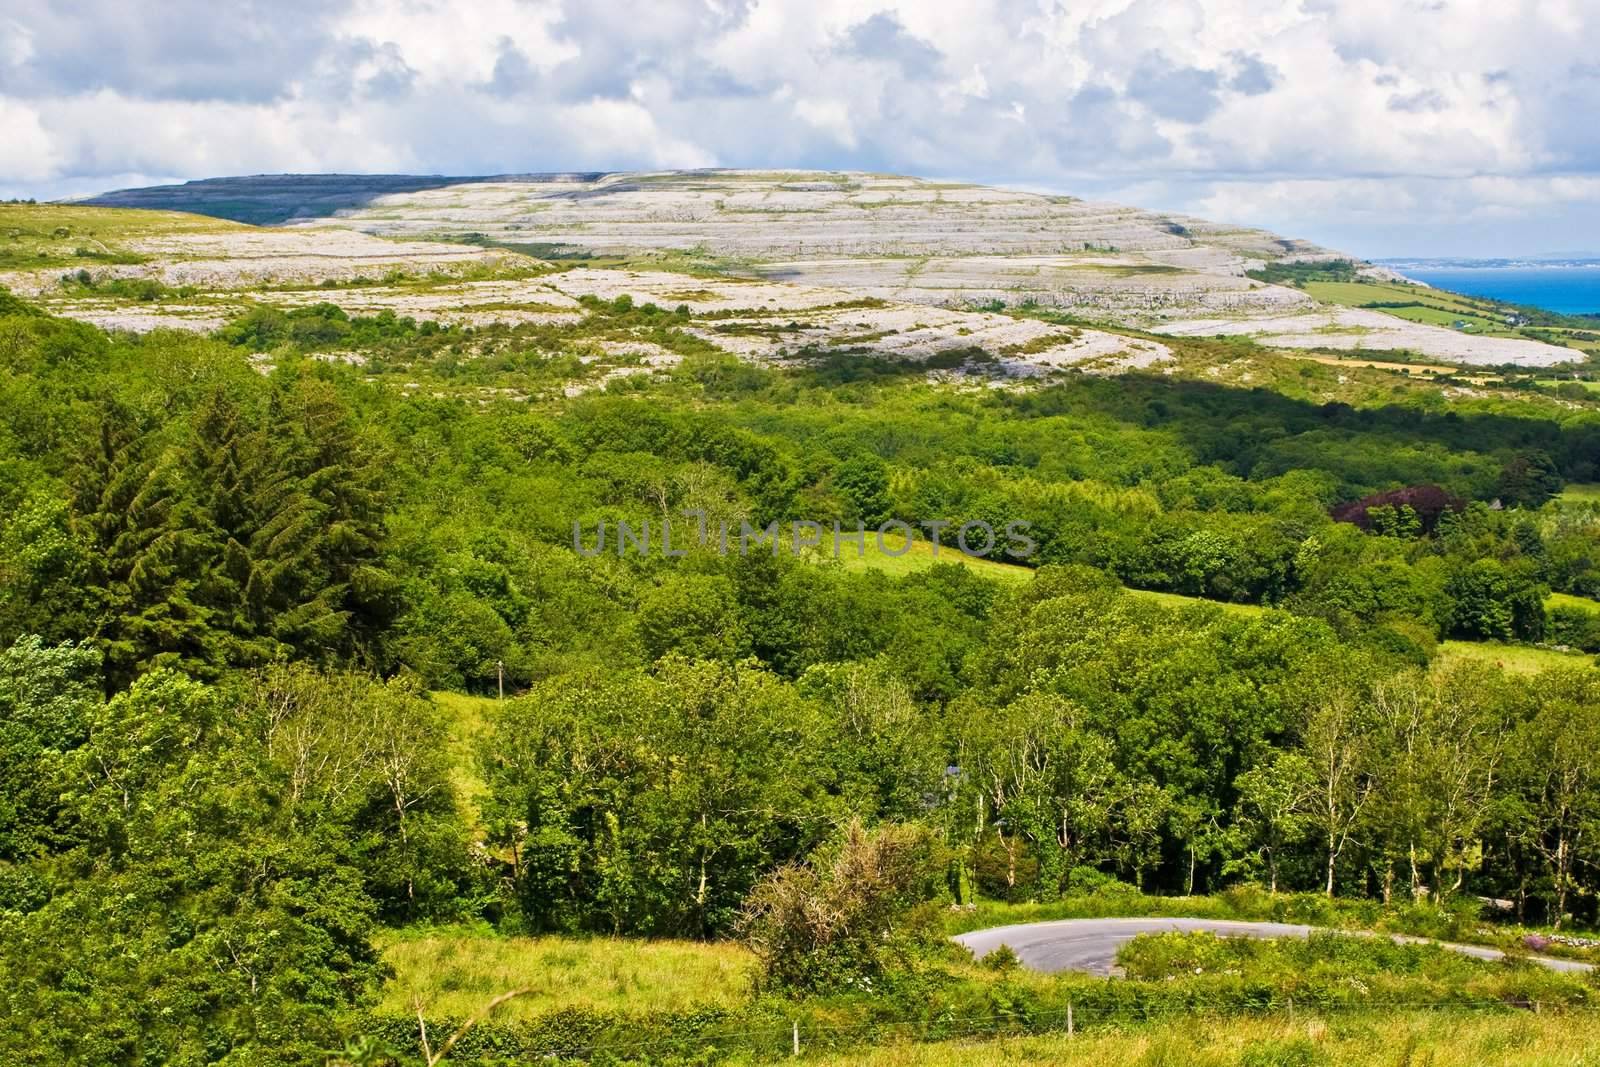 Landscape of County Clare, Ireland. Trees and a winding road are in the foreground. A hill of The Burren and the sky are in the background.